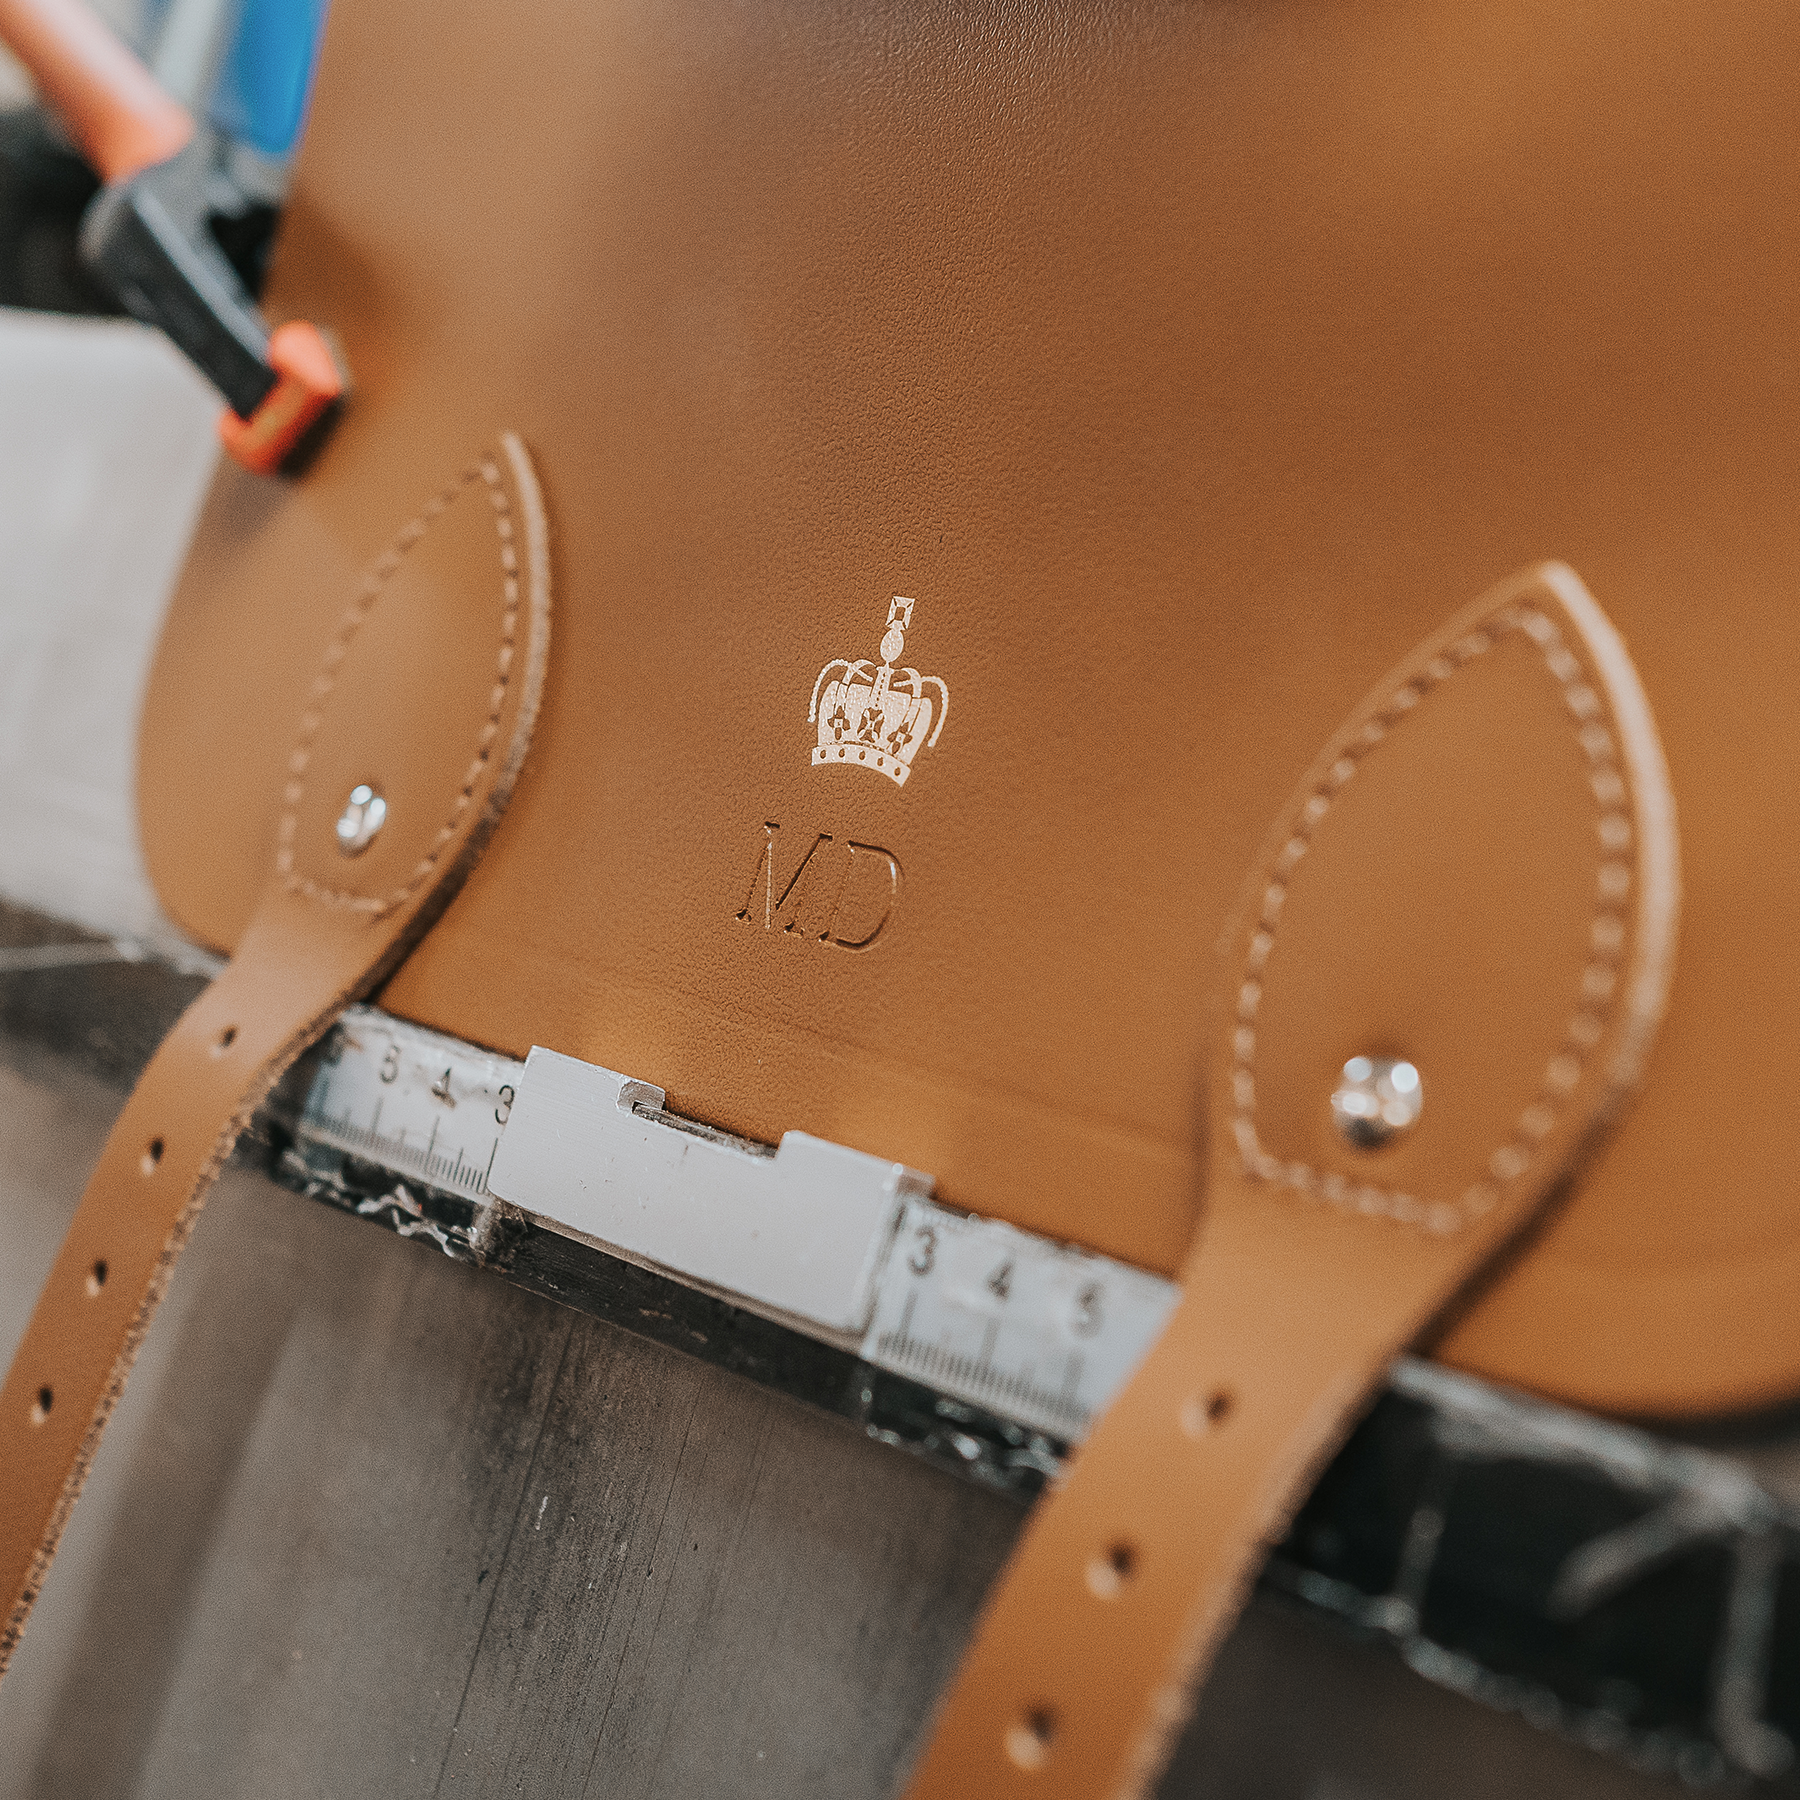 Personalisation Leather Goods - Bags